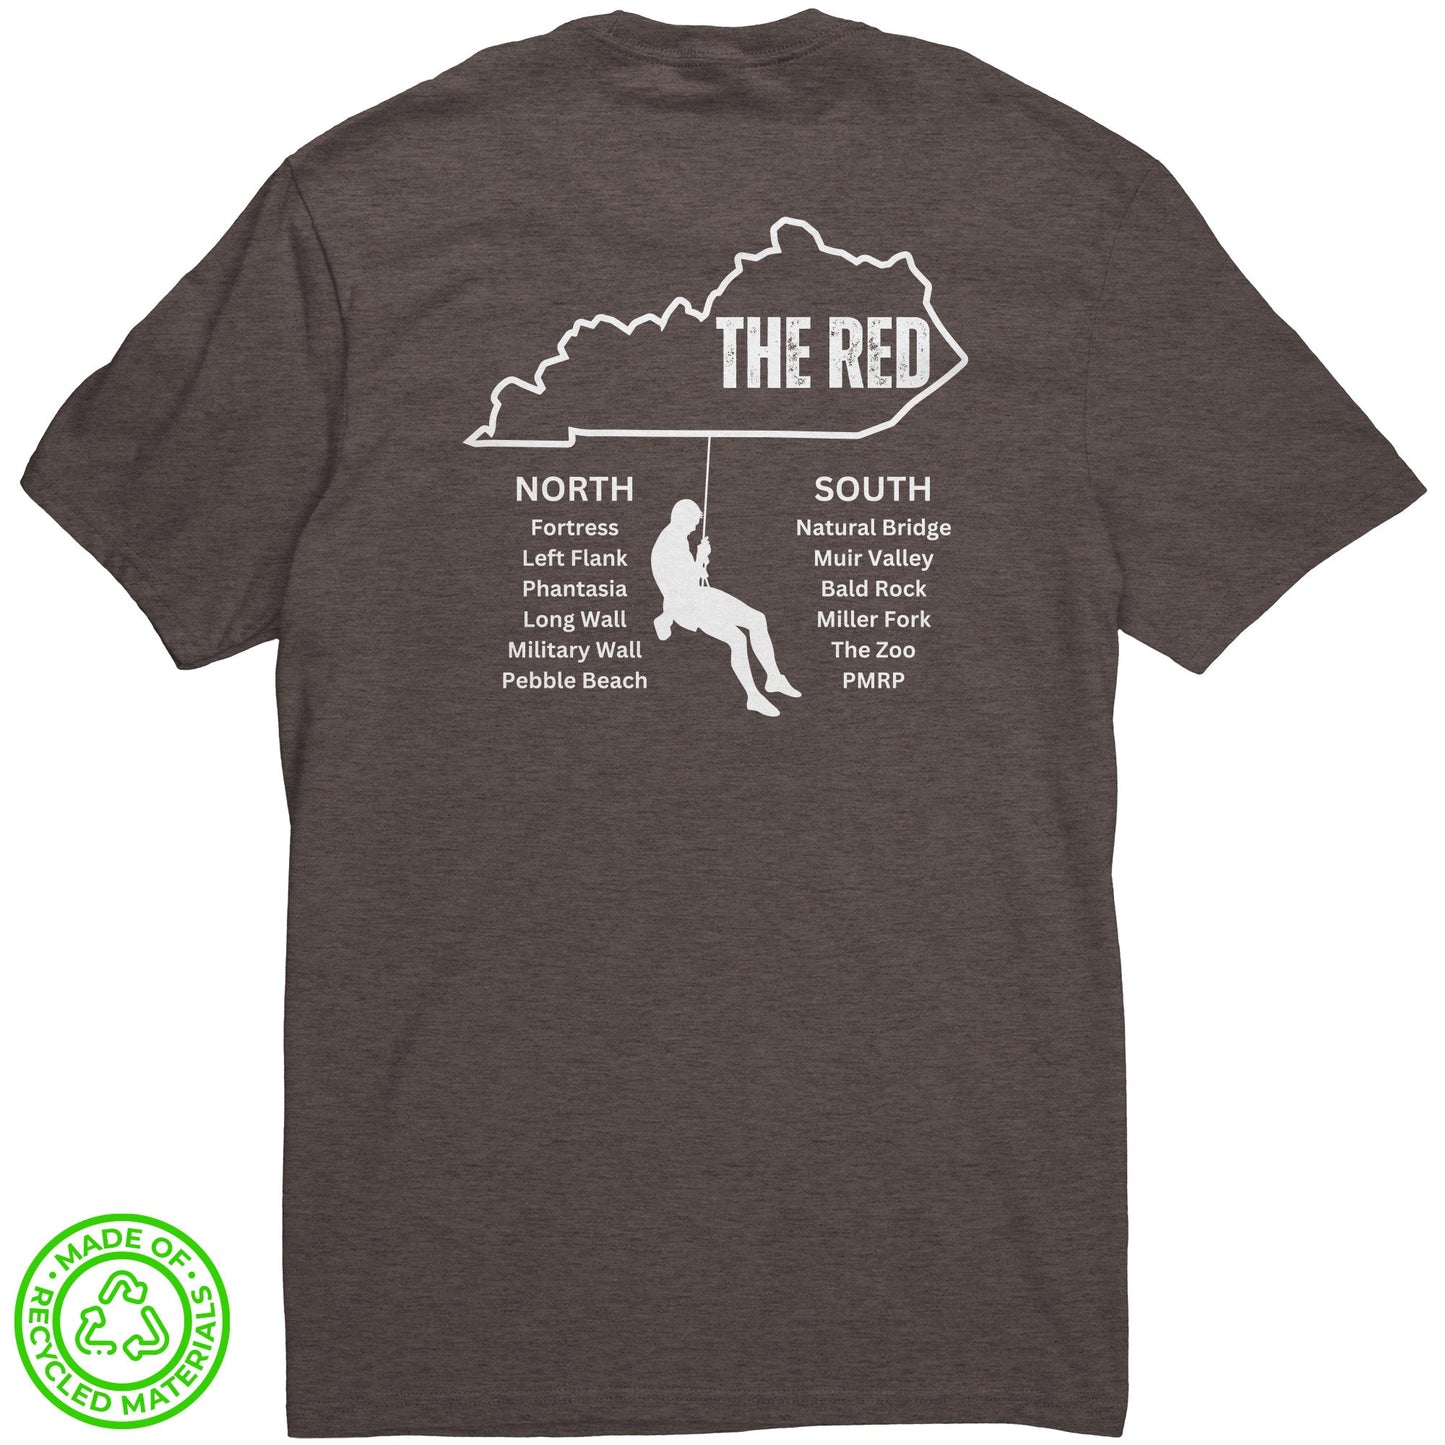 Eco-friendly Re-Tee (The Red North and South)